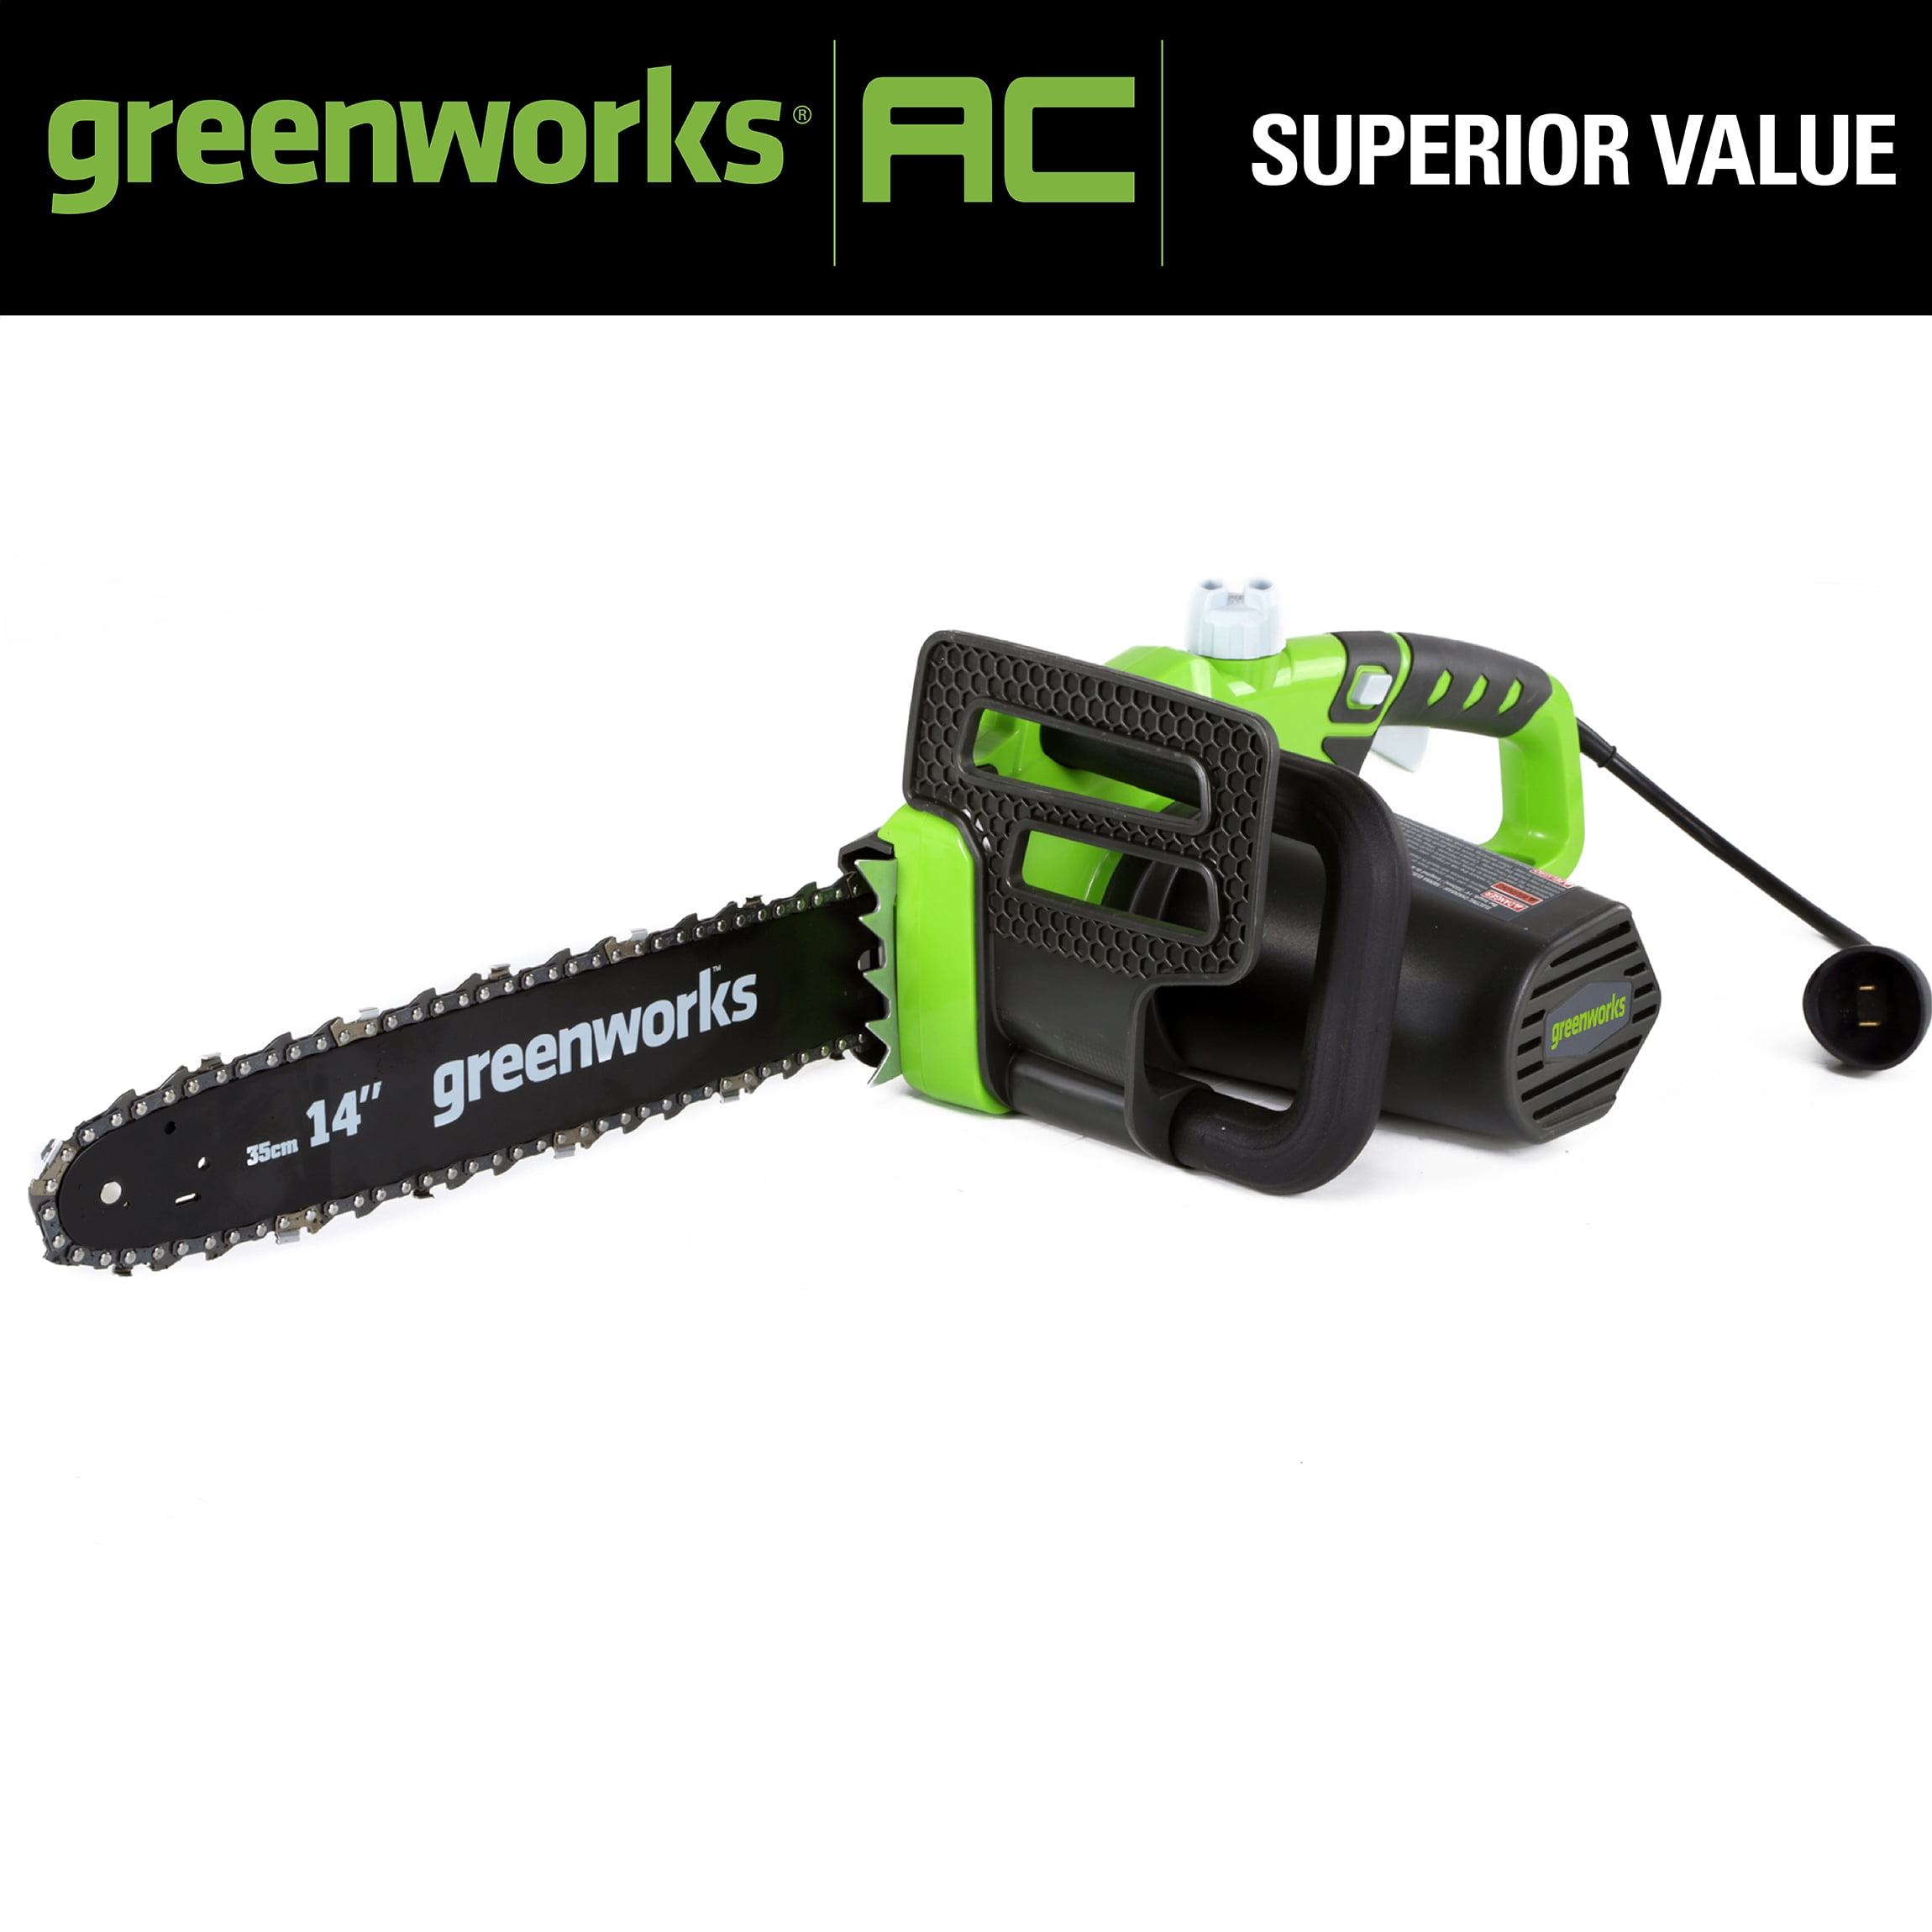 Greenworks 105 Amp 14-inch Corded Electric Chainsaw, 20222 - 1